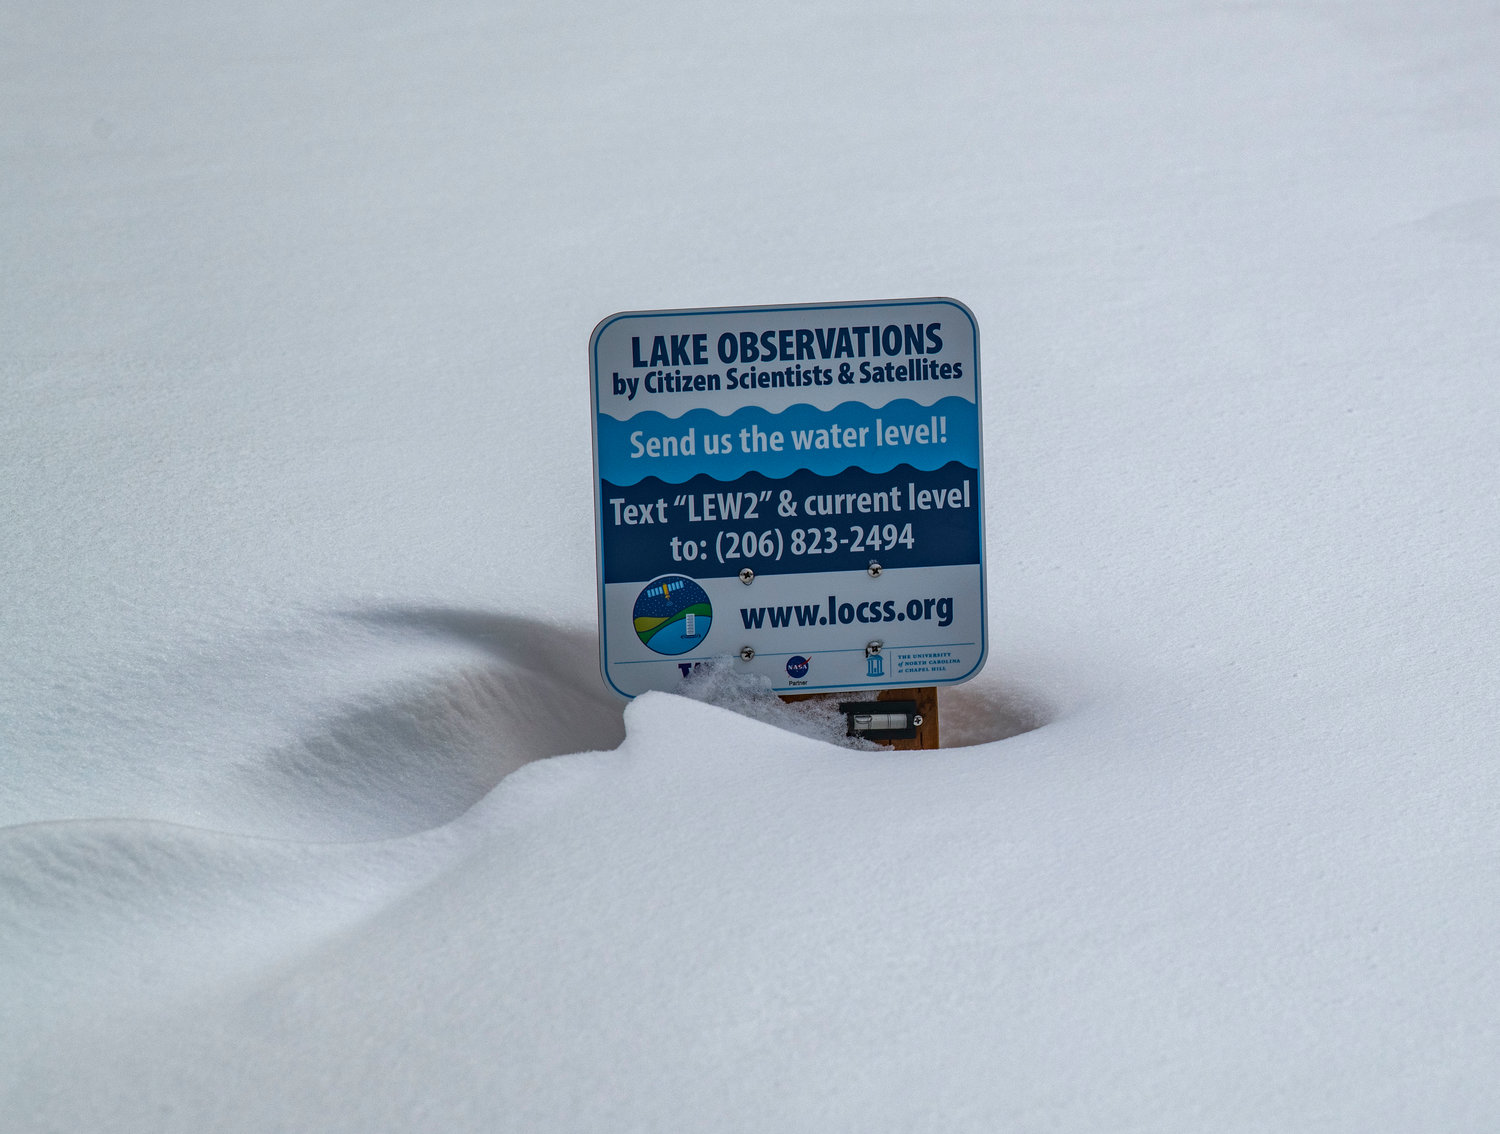 A sign on frozen Leech Lake is nearly covered in snow near the border of Yakima and Lewis counties at the White Pass Ski Area’s Nordic trails on Sunday.